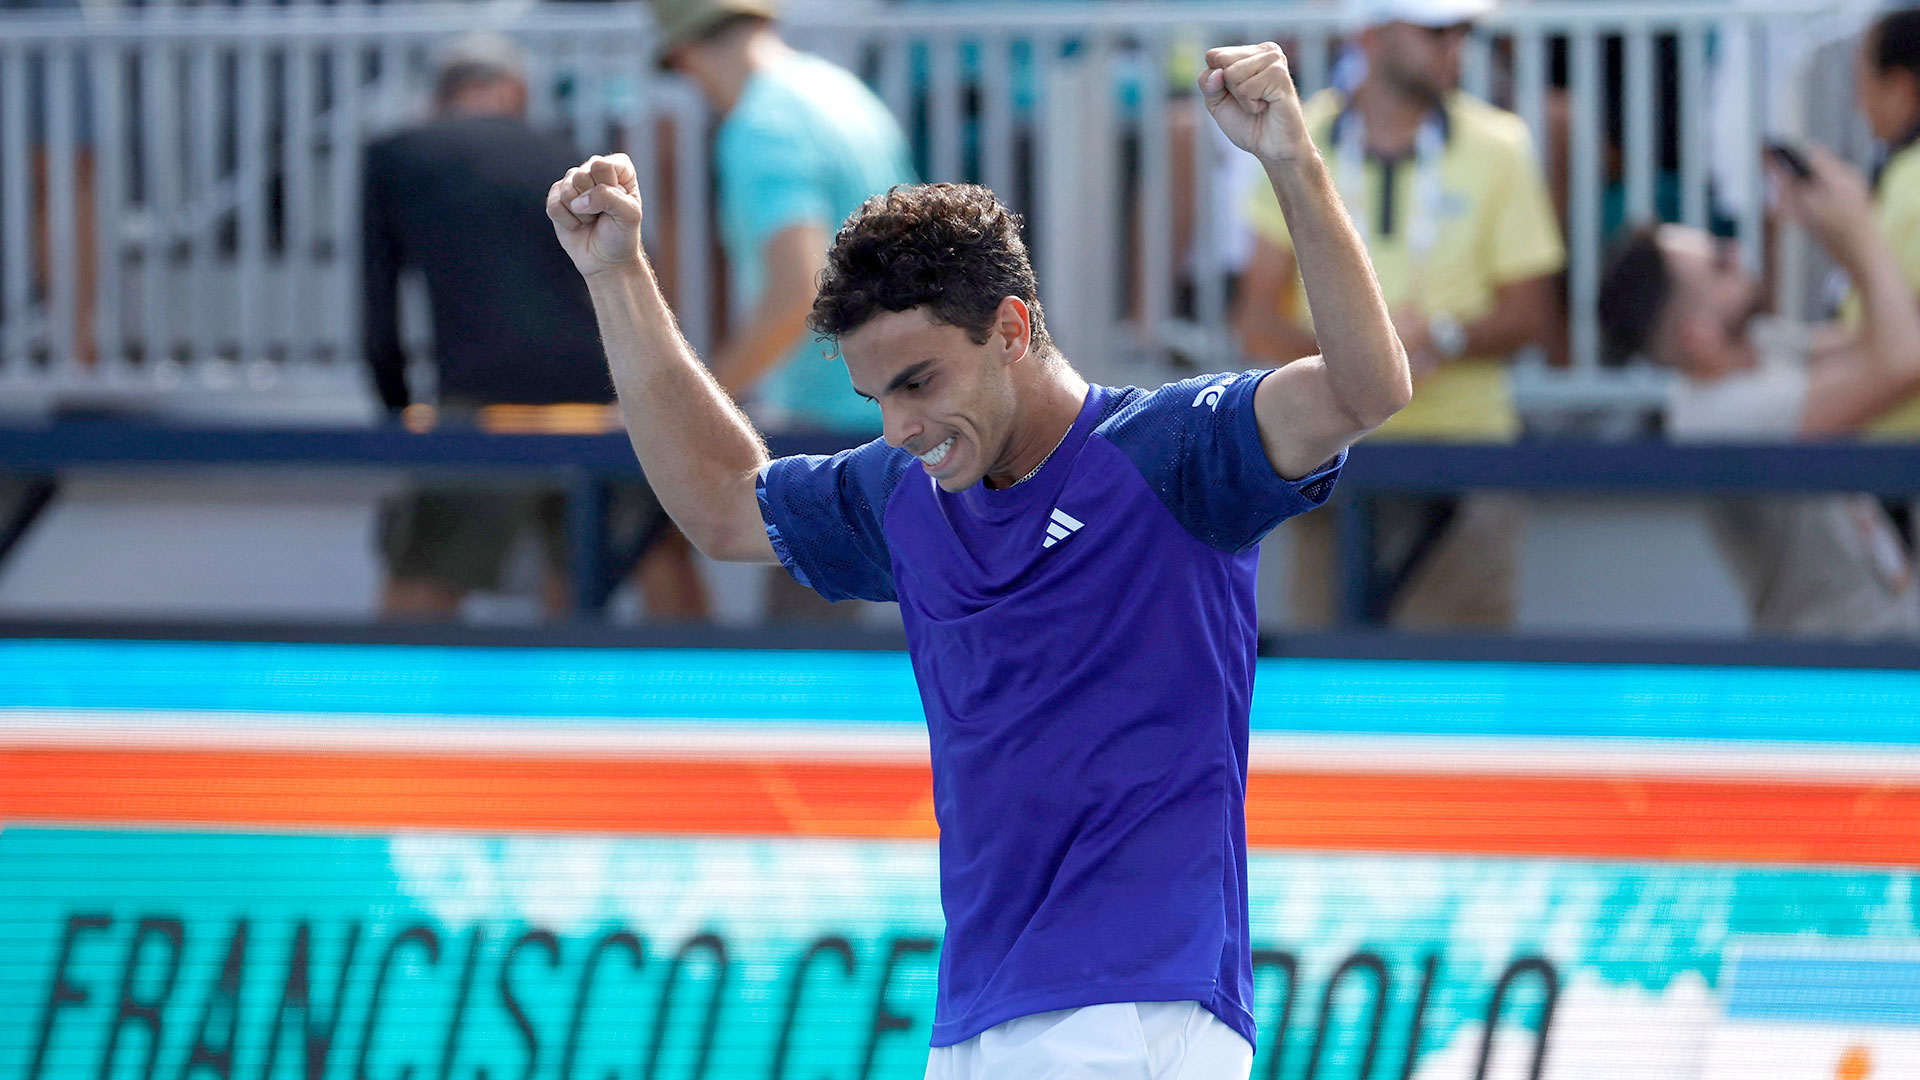 Mar 27, 2023; Miami, Florida, US; Francisco Cerundolo (ARG) celebrates after his match against Felix Auger-Aliassime (CAN) on day eight of the Miami Open at Hard Rock Stadium. Mandatory Credit: Geoff Burke-USA TODAY Sports